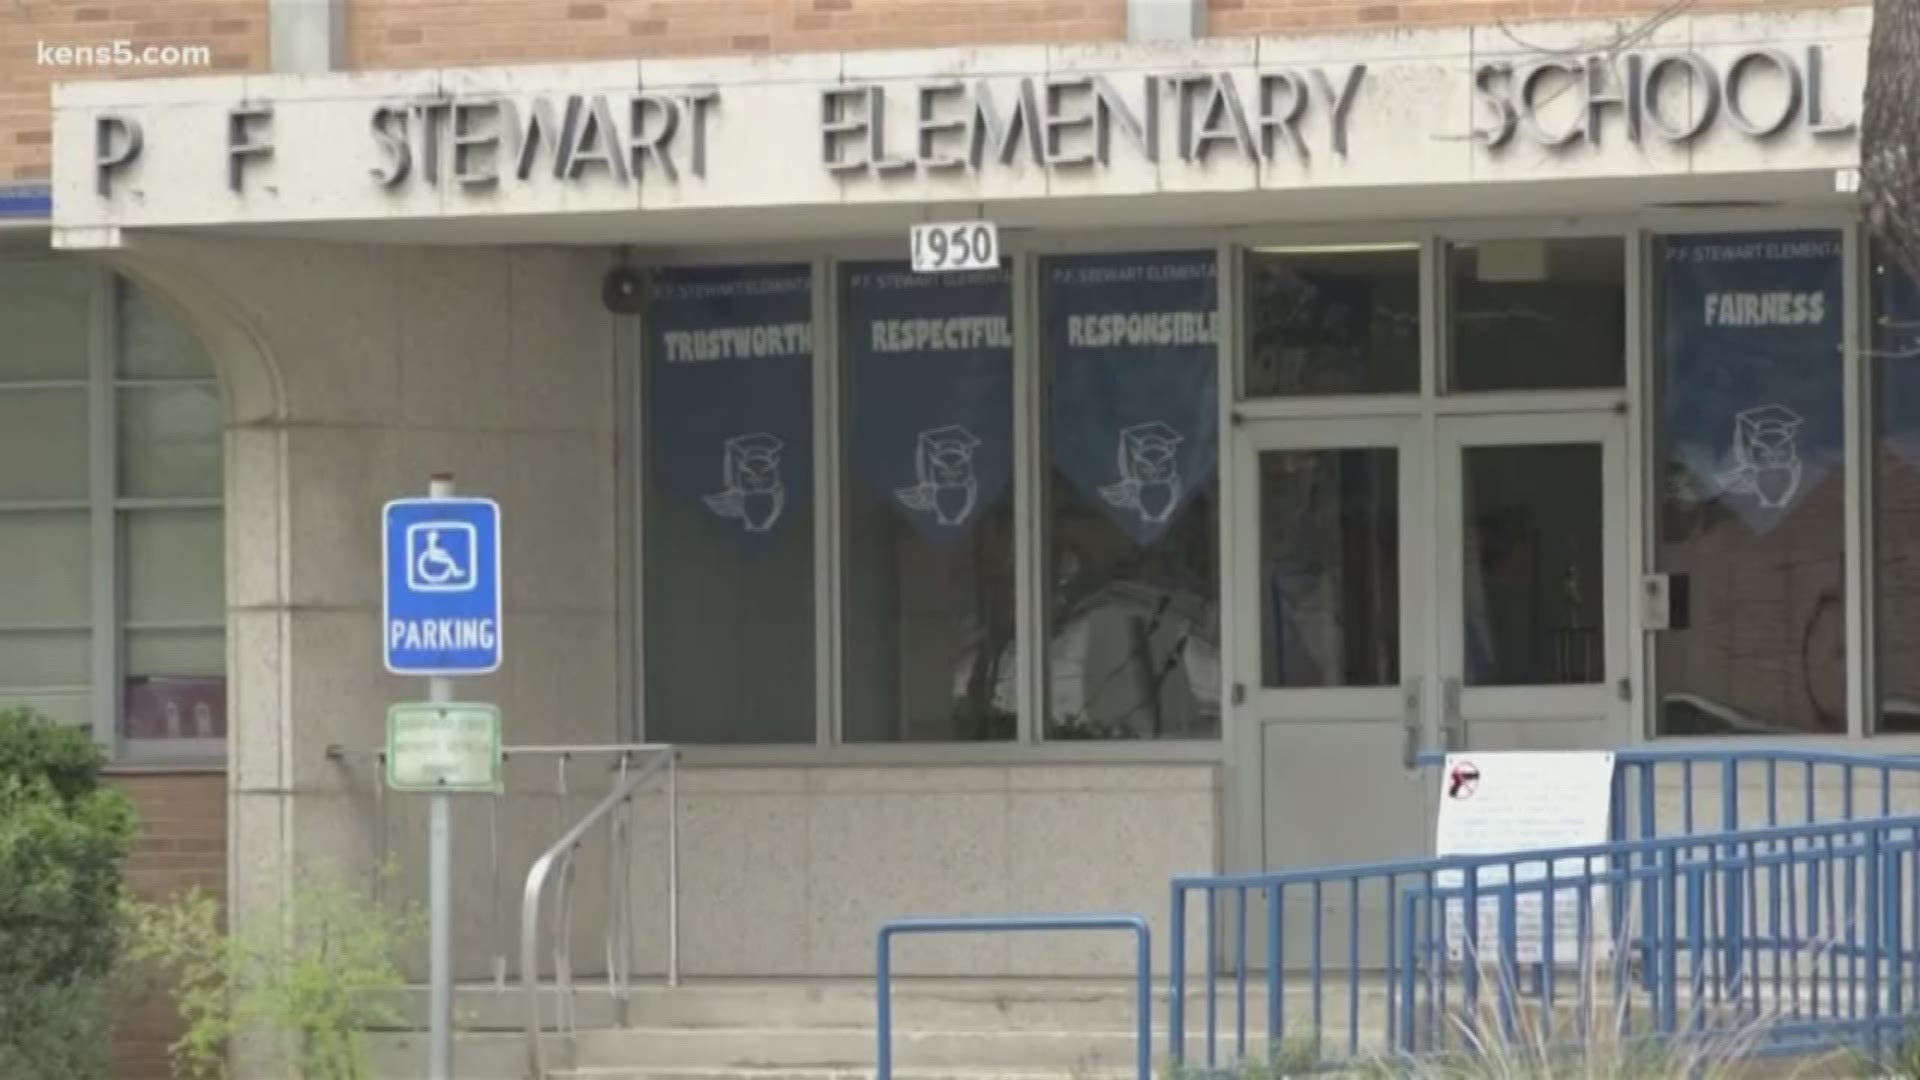 The New York-based program has to get Stewart Elementary to meet Texas Education Agency standards, something it hasn't done in years.